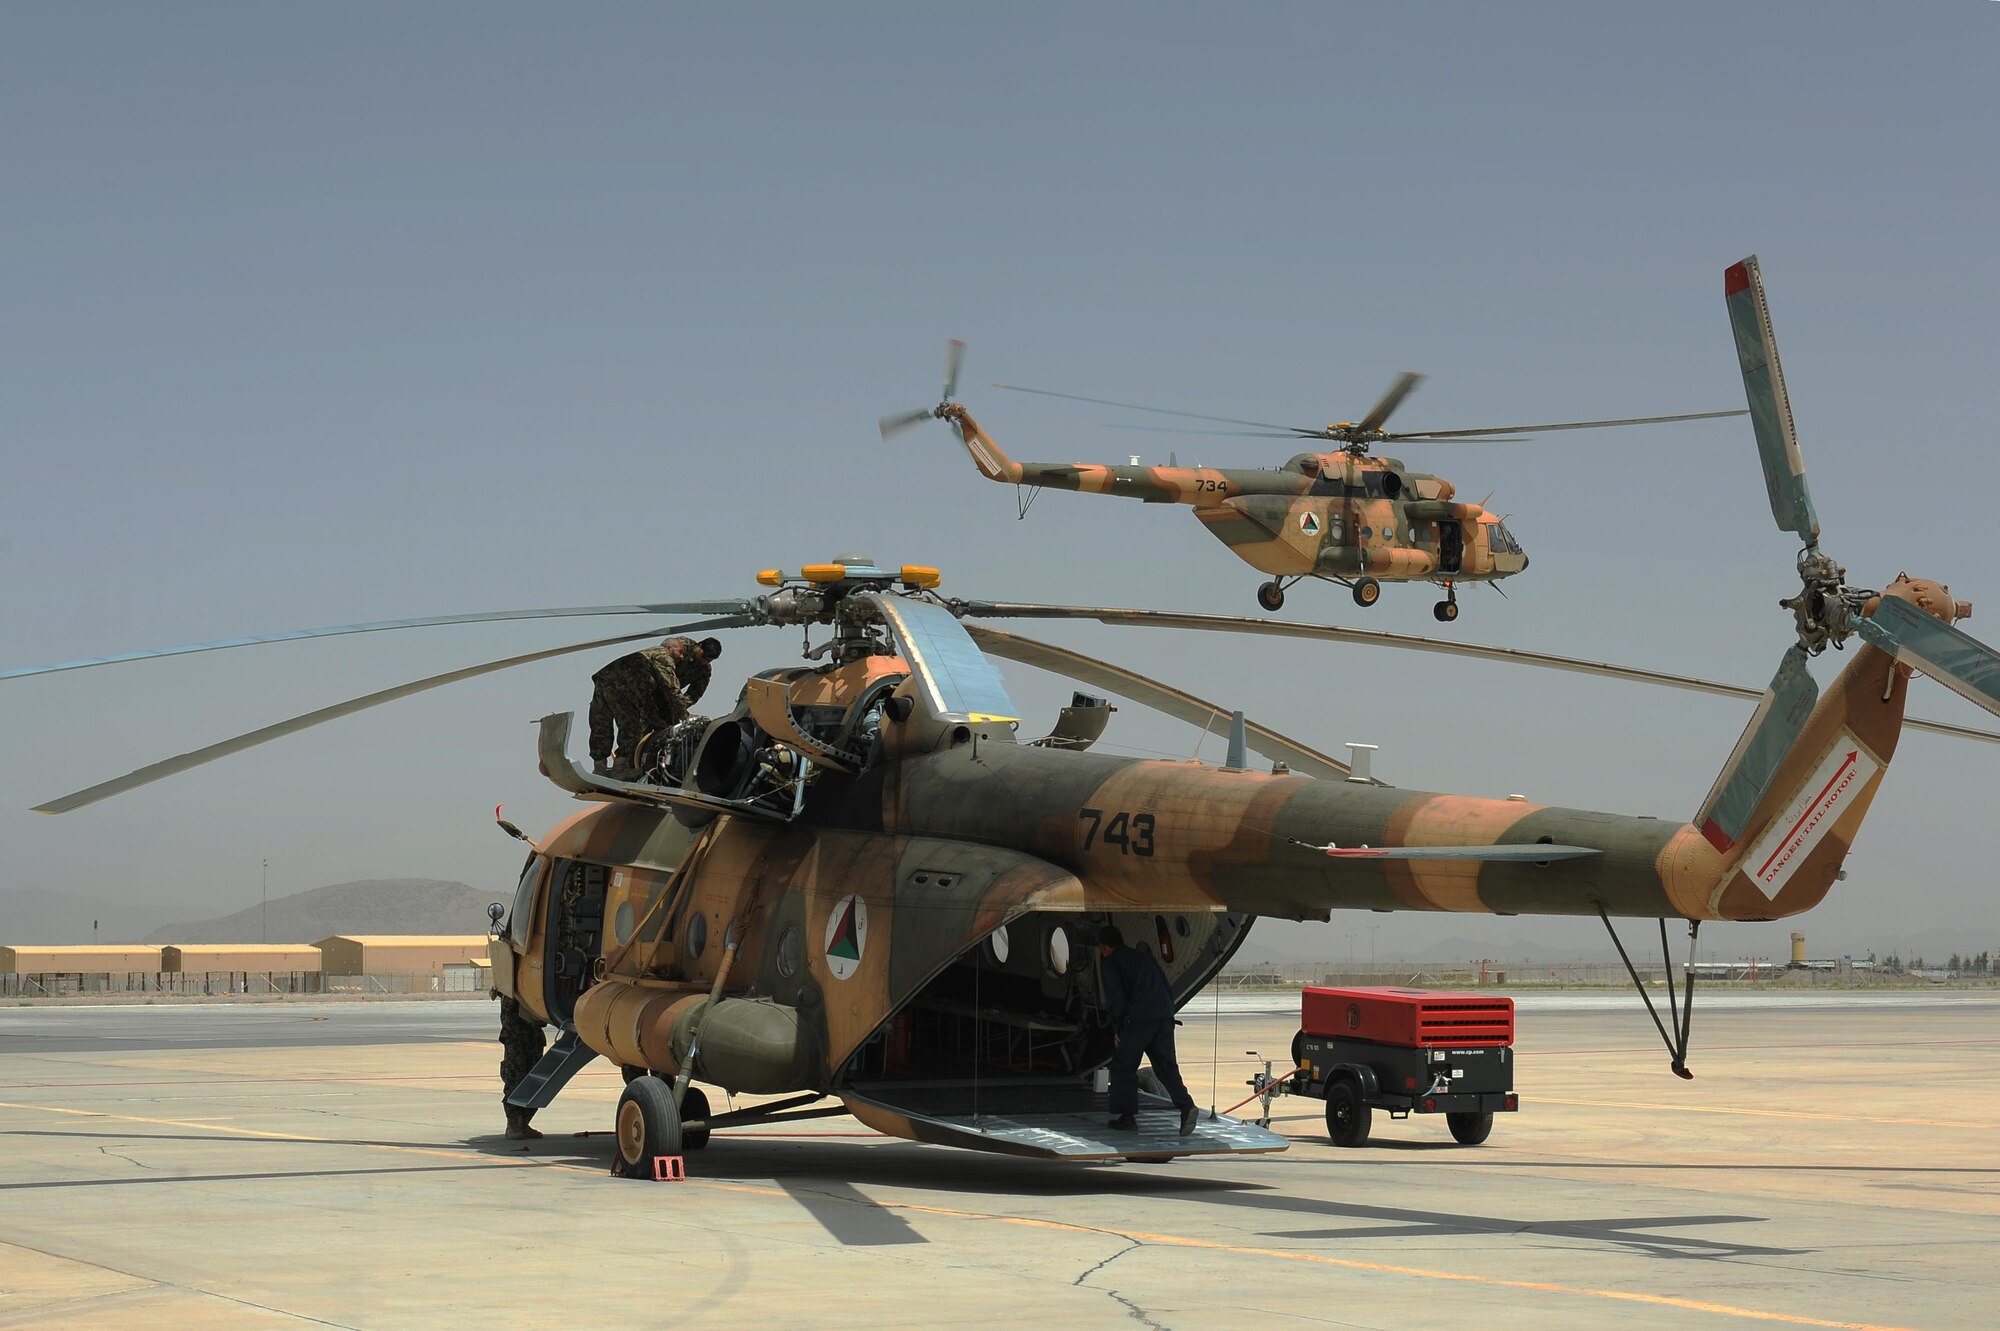 Afghan Air Force maintainers work to fix an Mi-17 at Kandahar Air Wing while another Mi-17 flies off to perform a mission, April 29, 2015. (U.S. Air Force photo/Capt. Jeff M. Nagan)